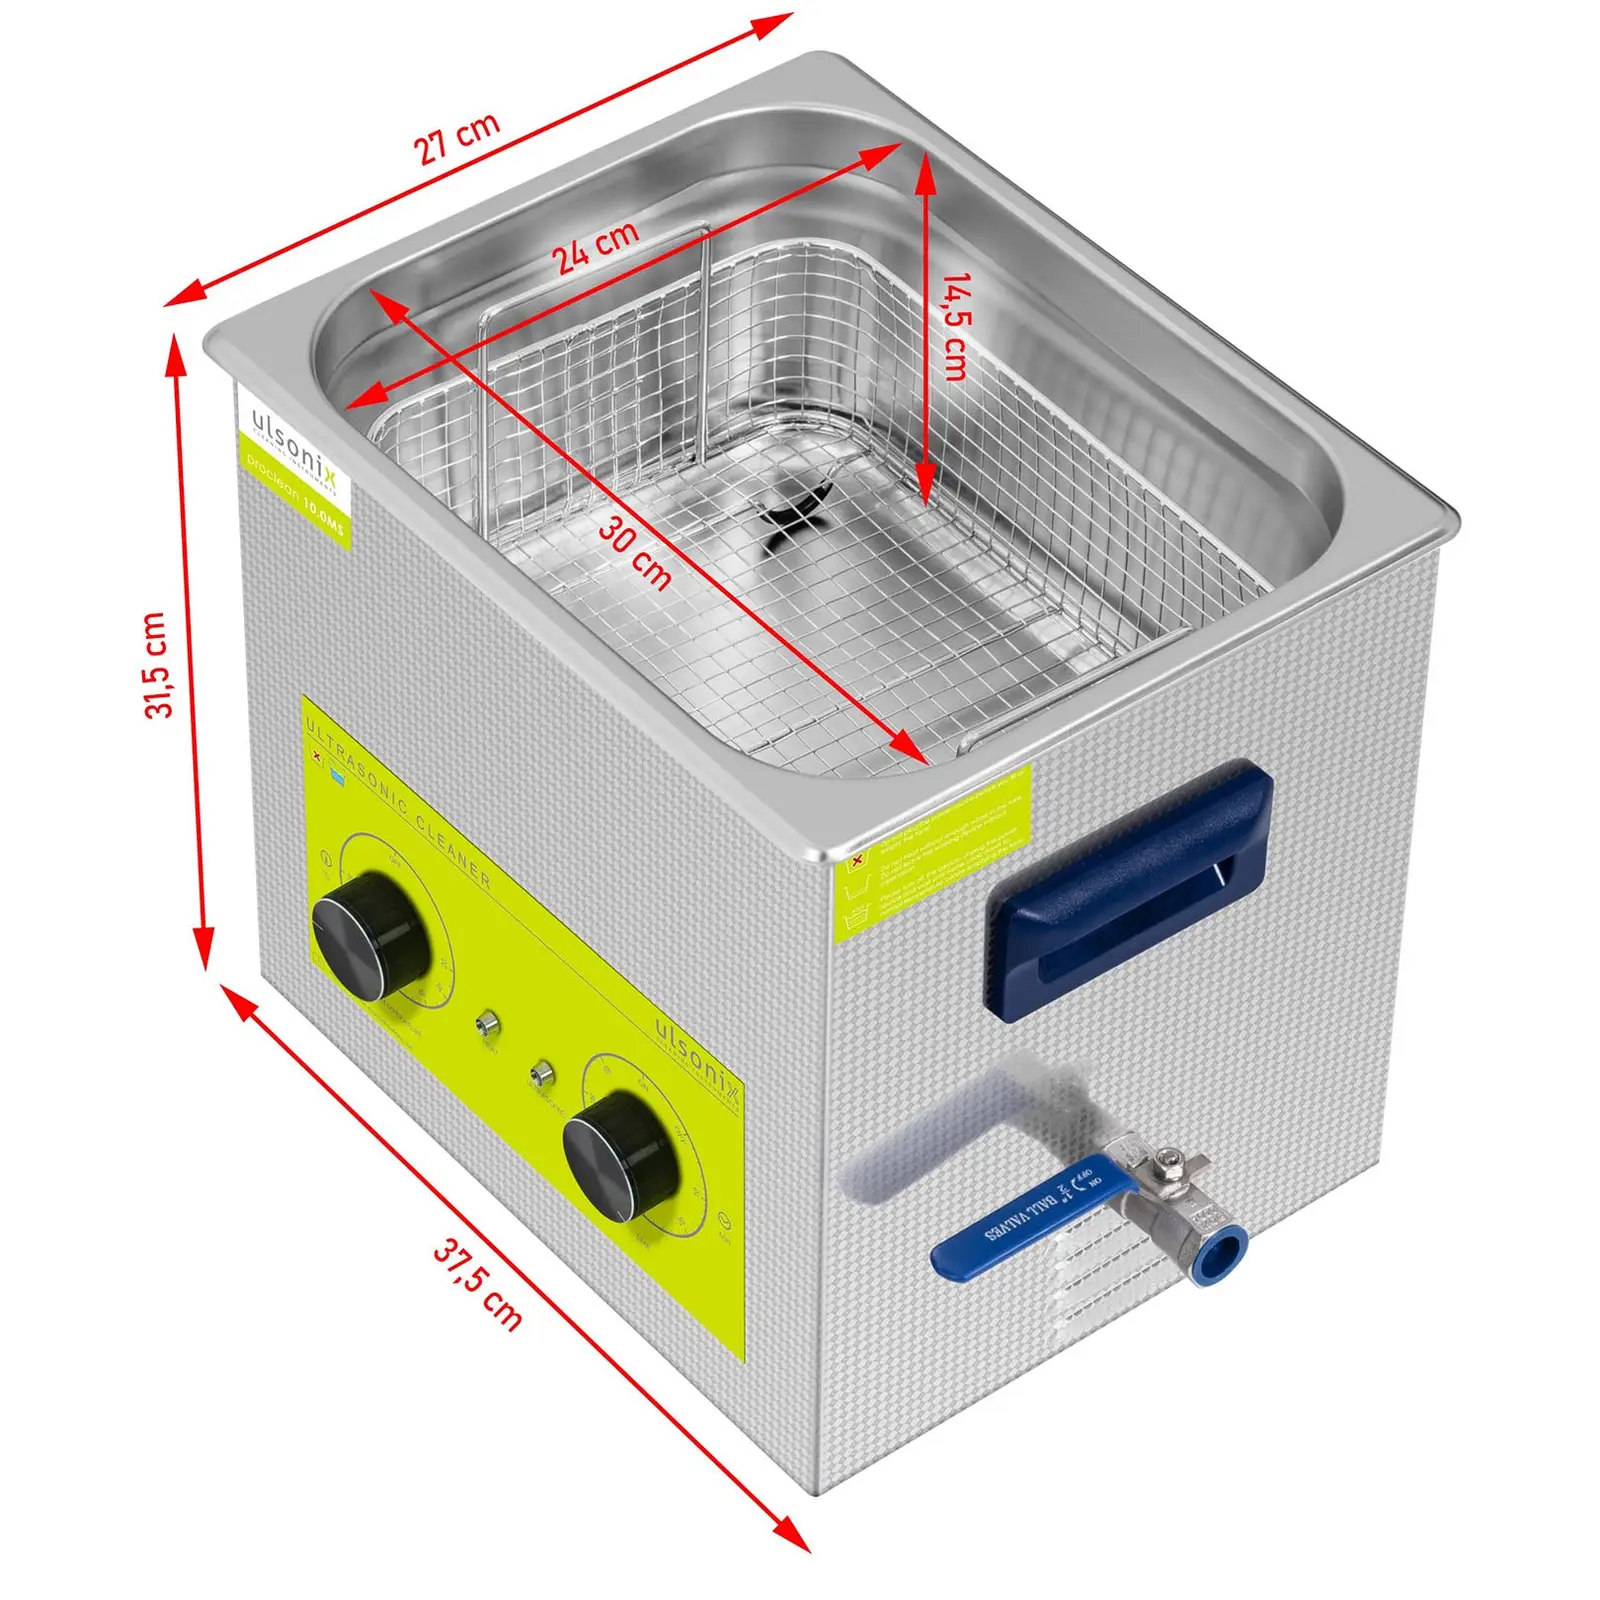 Ultrasonic Cleaner - 10 litres - 240 W